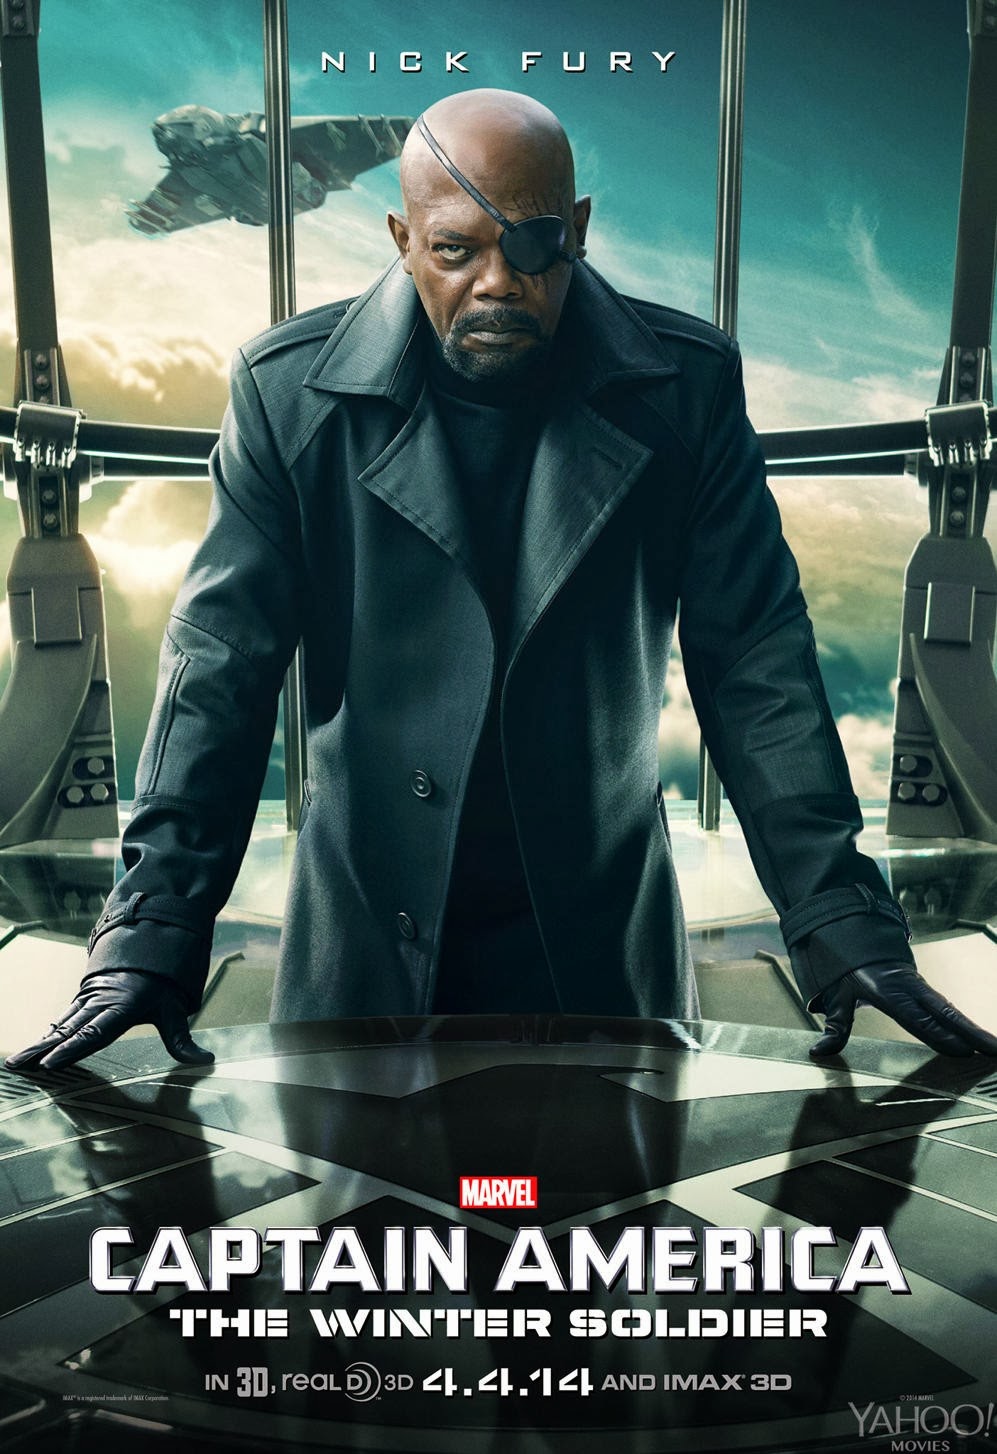 Captain America: The Winter Soldier Teaser Character Movie Poster Set - Samuel L. Jackson as Nick Fury